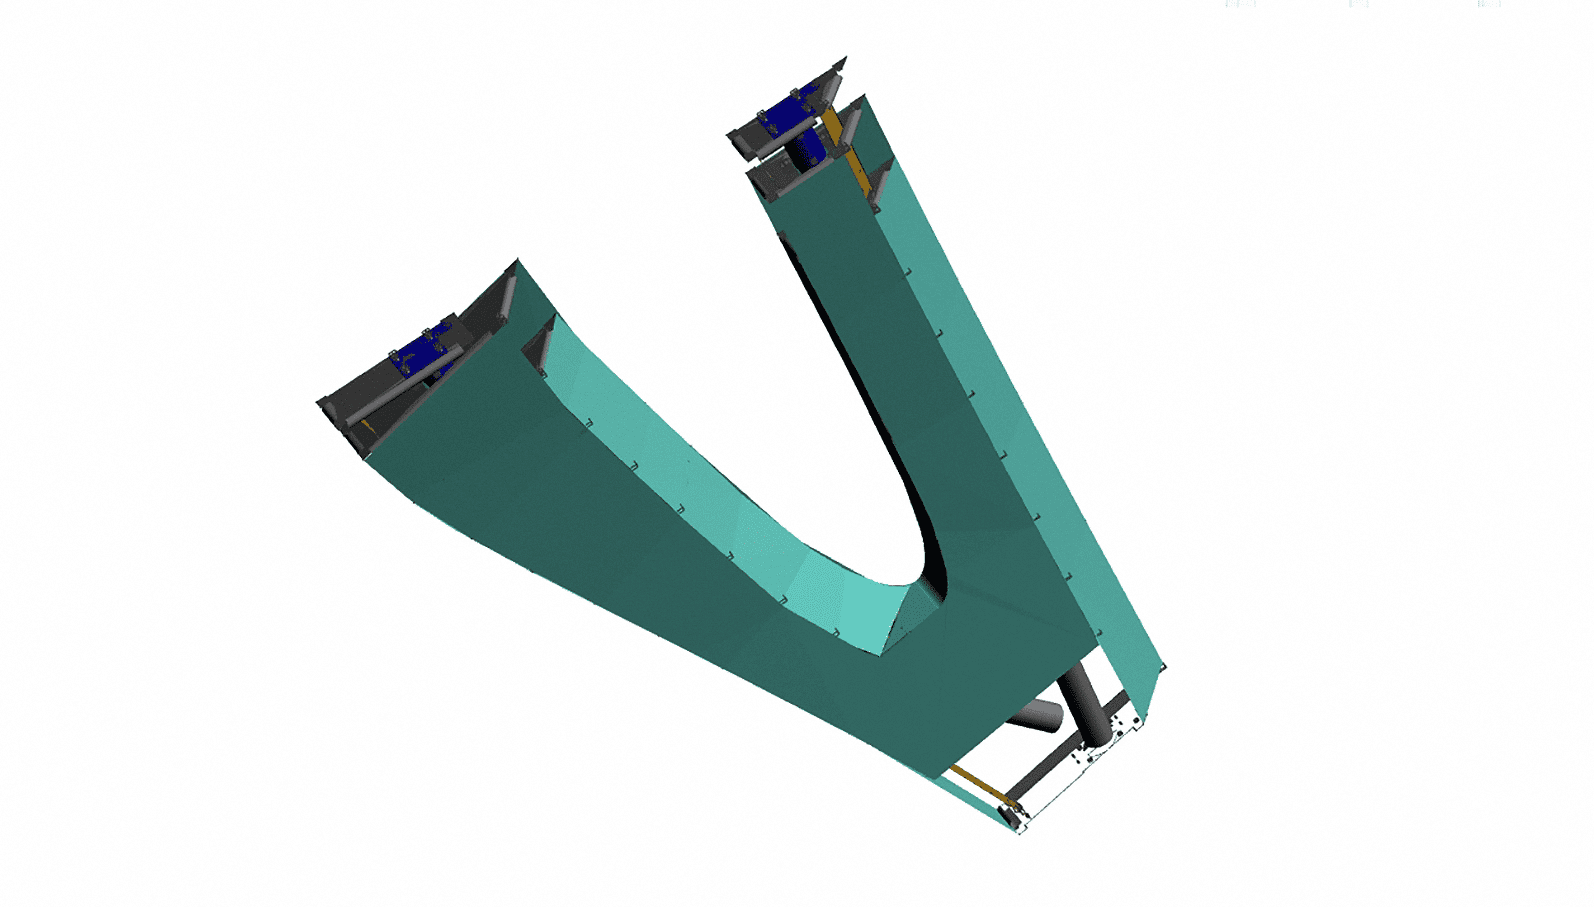 3D Model of a single ZEPPS Assembly for the Petersen Automotive Museum.